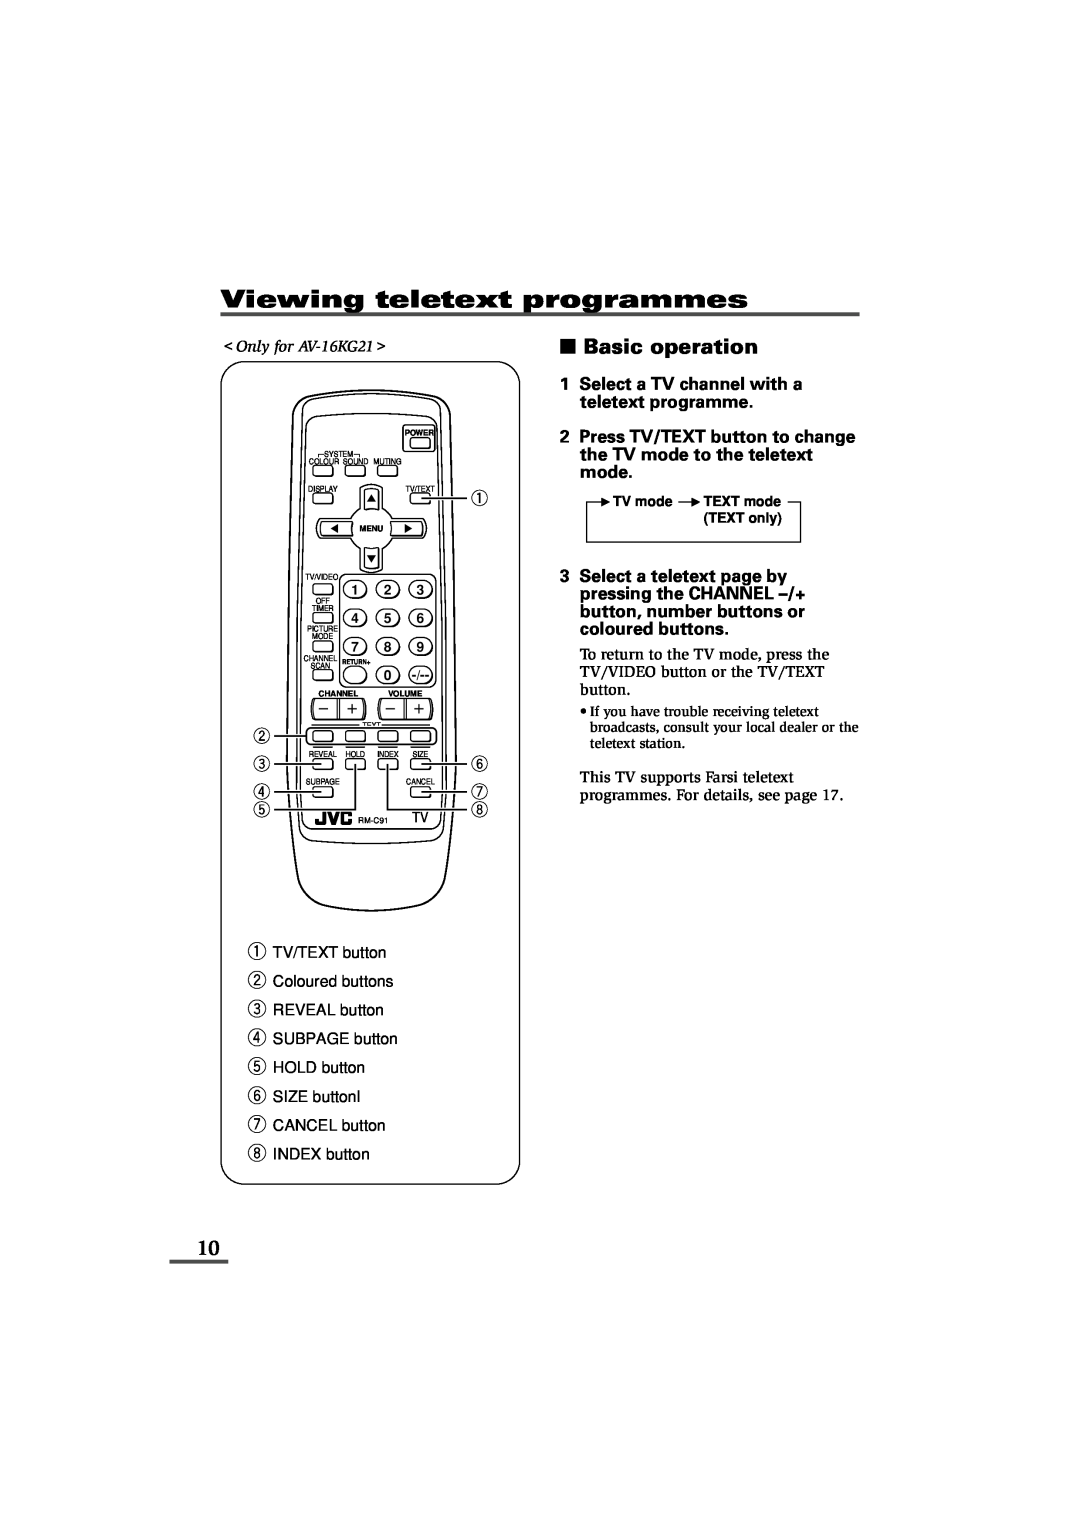 JVC AV-16KG21 Viewing teletext programmes, Basic operation, Select a TV channel with a, Press TV/TEXT button to change 